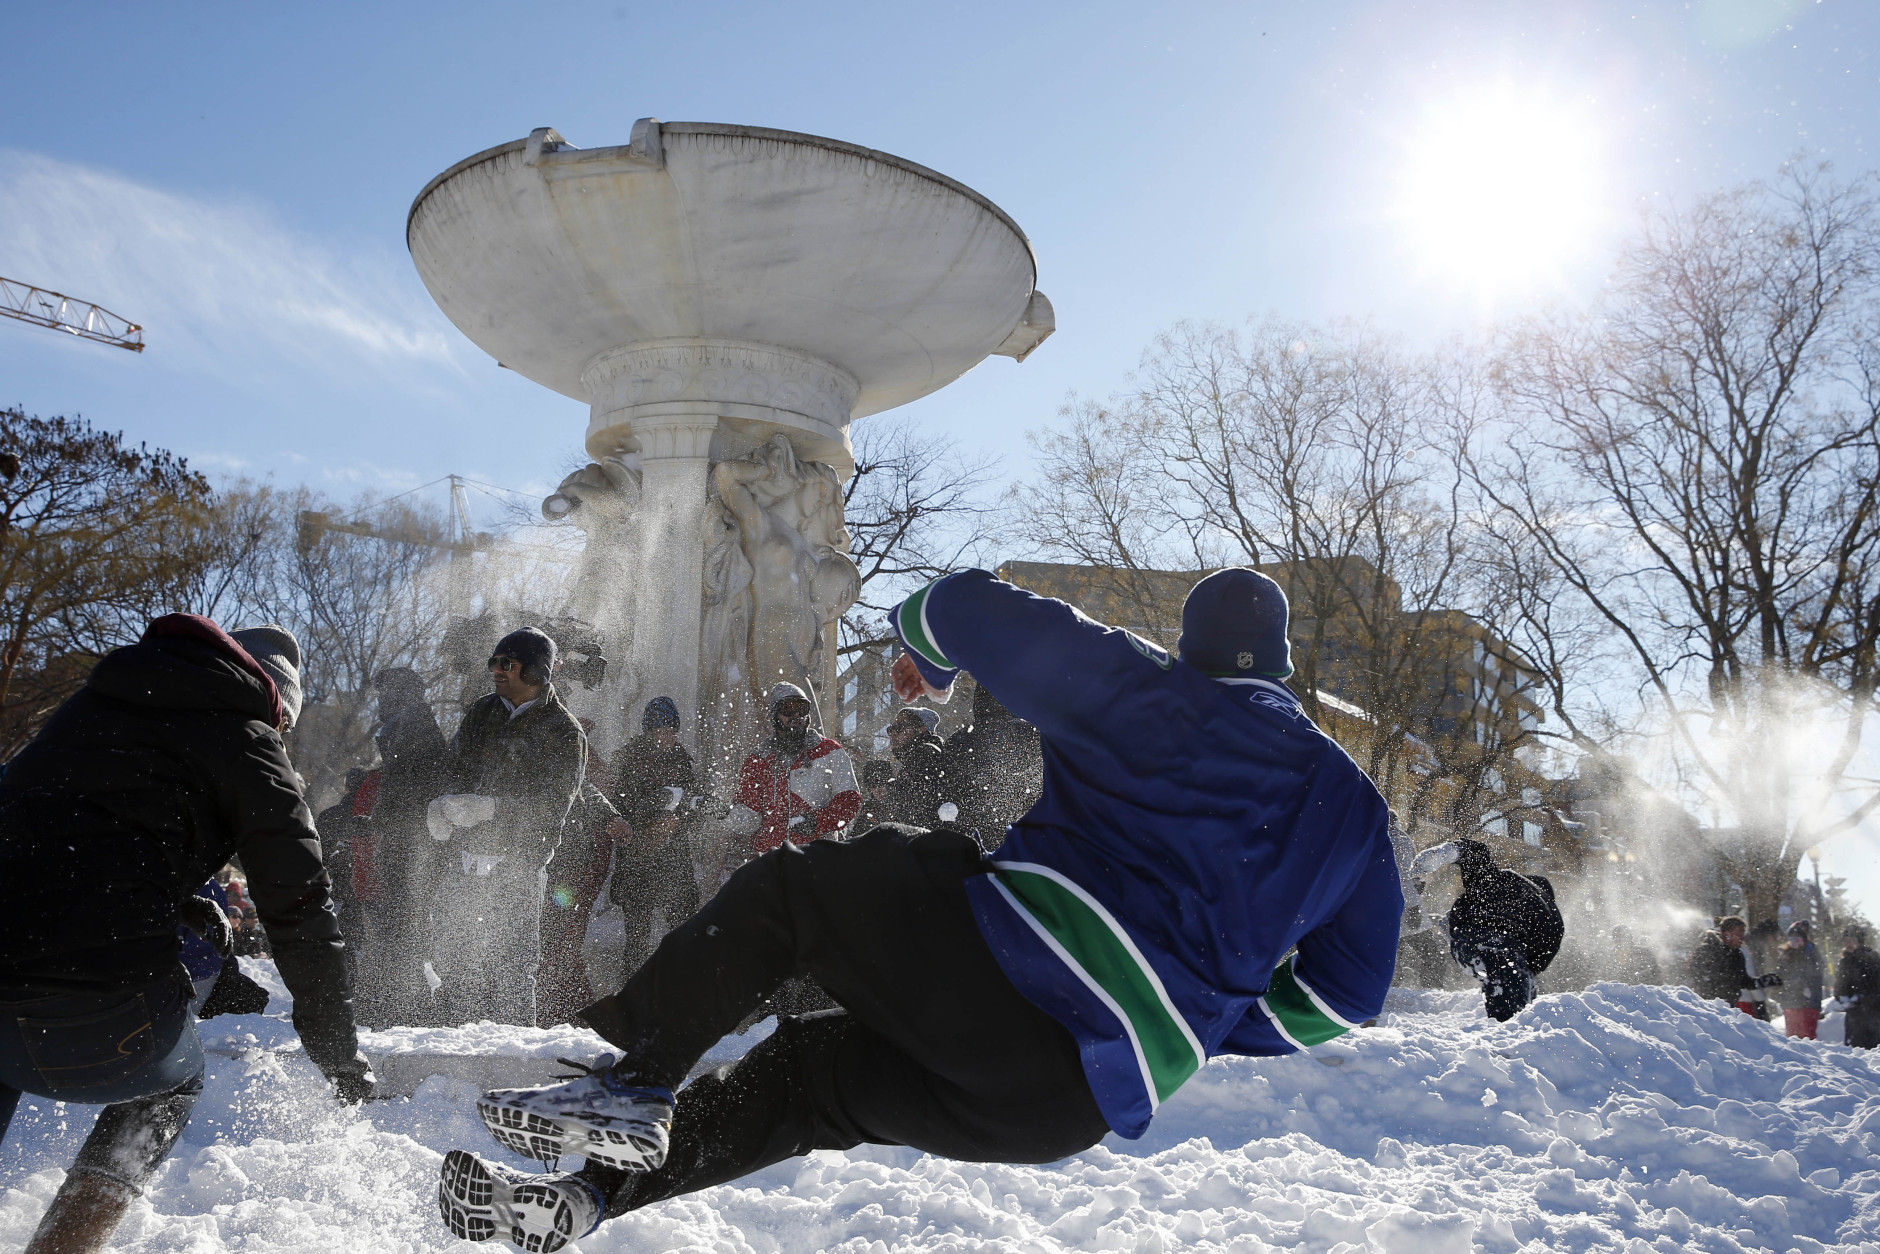 A man does a flying move to throw his snowball during an organized snowball fight at Dupont Circle Sunday, Jan. 24, 2016 in Washington. (AP Photo/Alex Brandon)